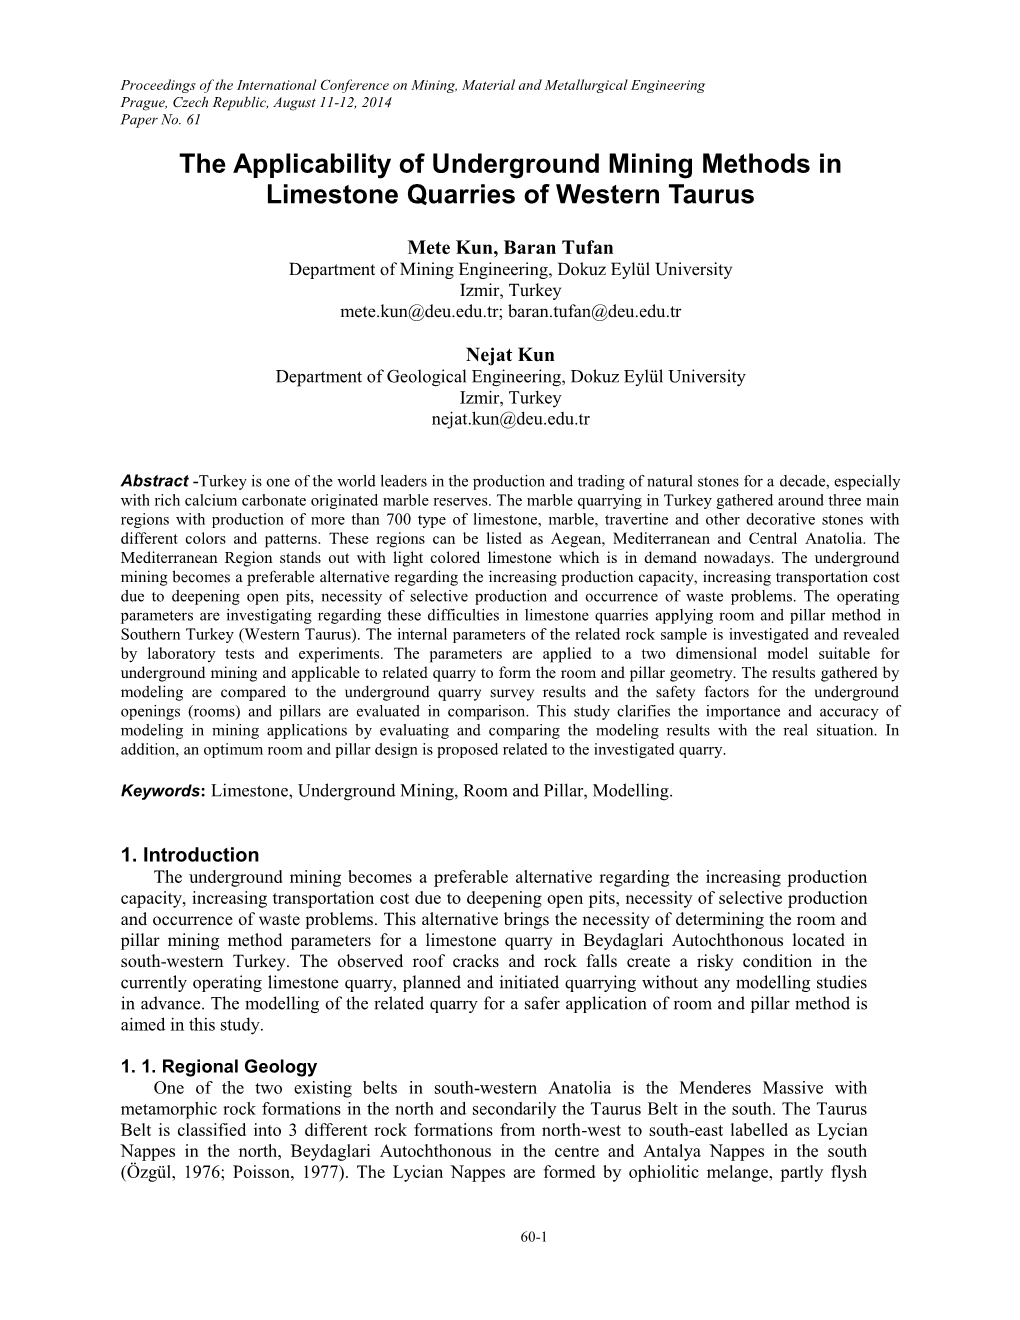 The Applicability of Underground Mining Methods in Limestone Quarries of Western Taurus